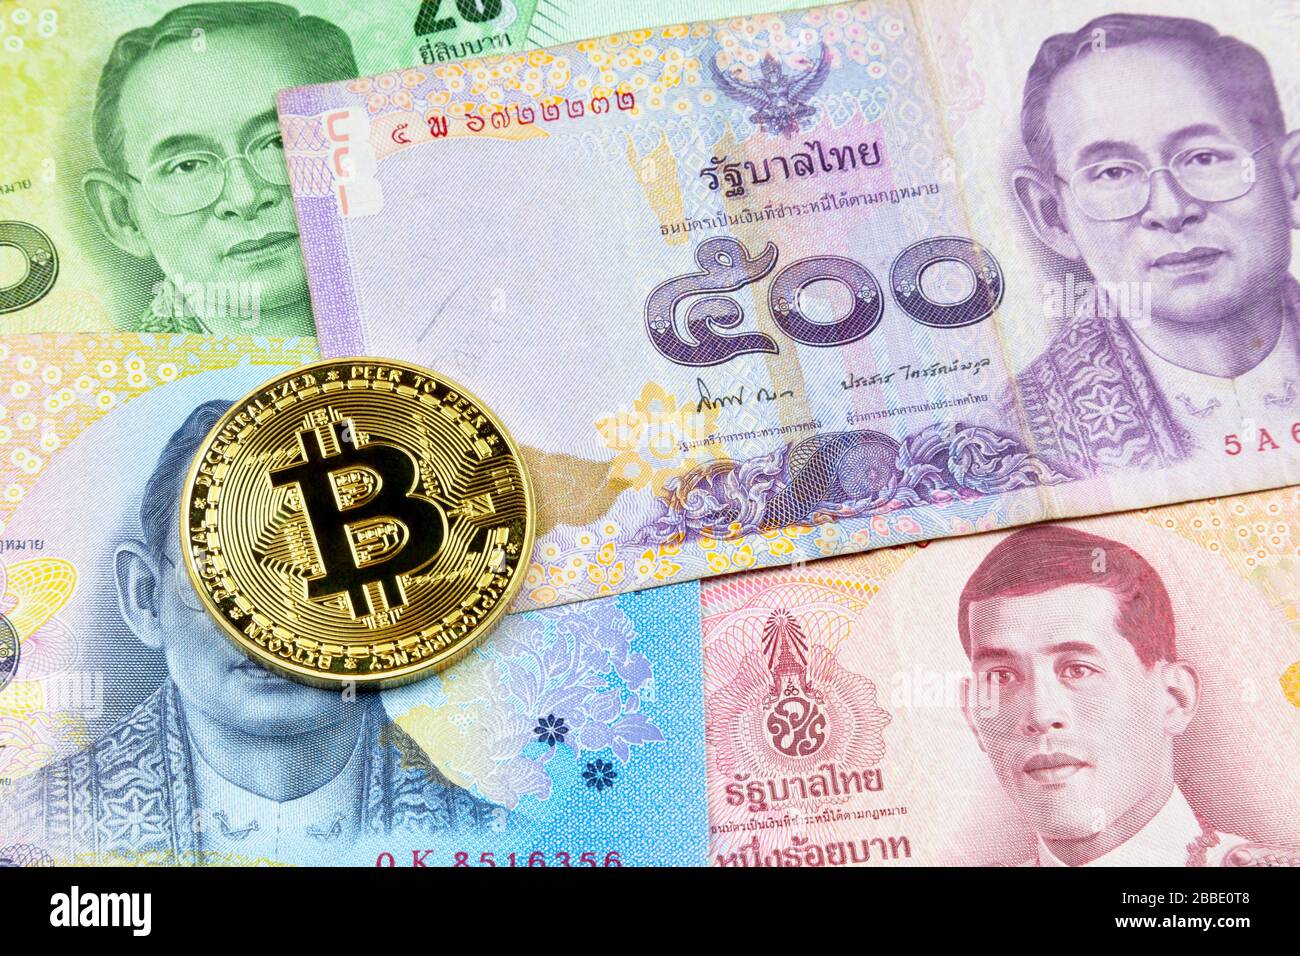 Close-up on a golden Bitcoin coin on top of a stack of Thai Baht banknotes. Stock Photo